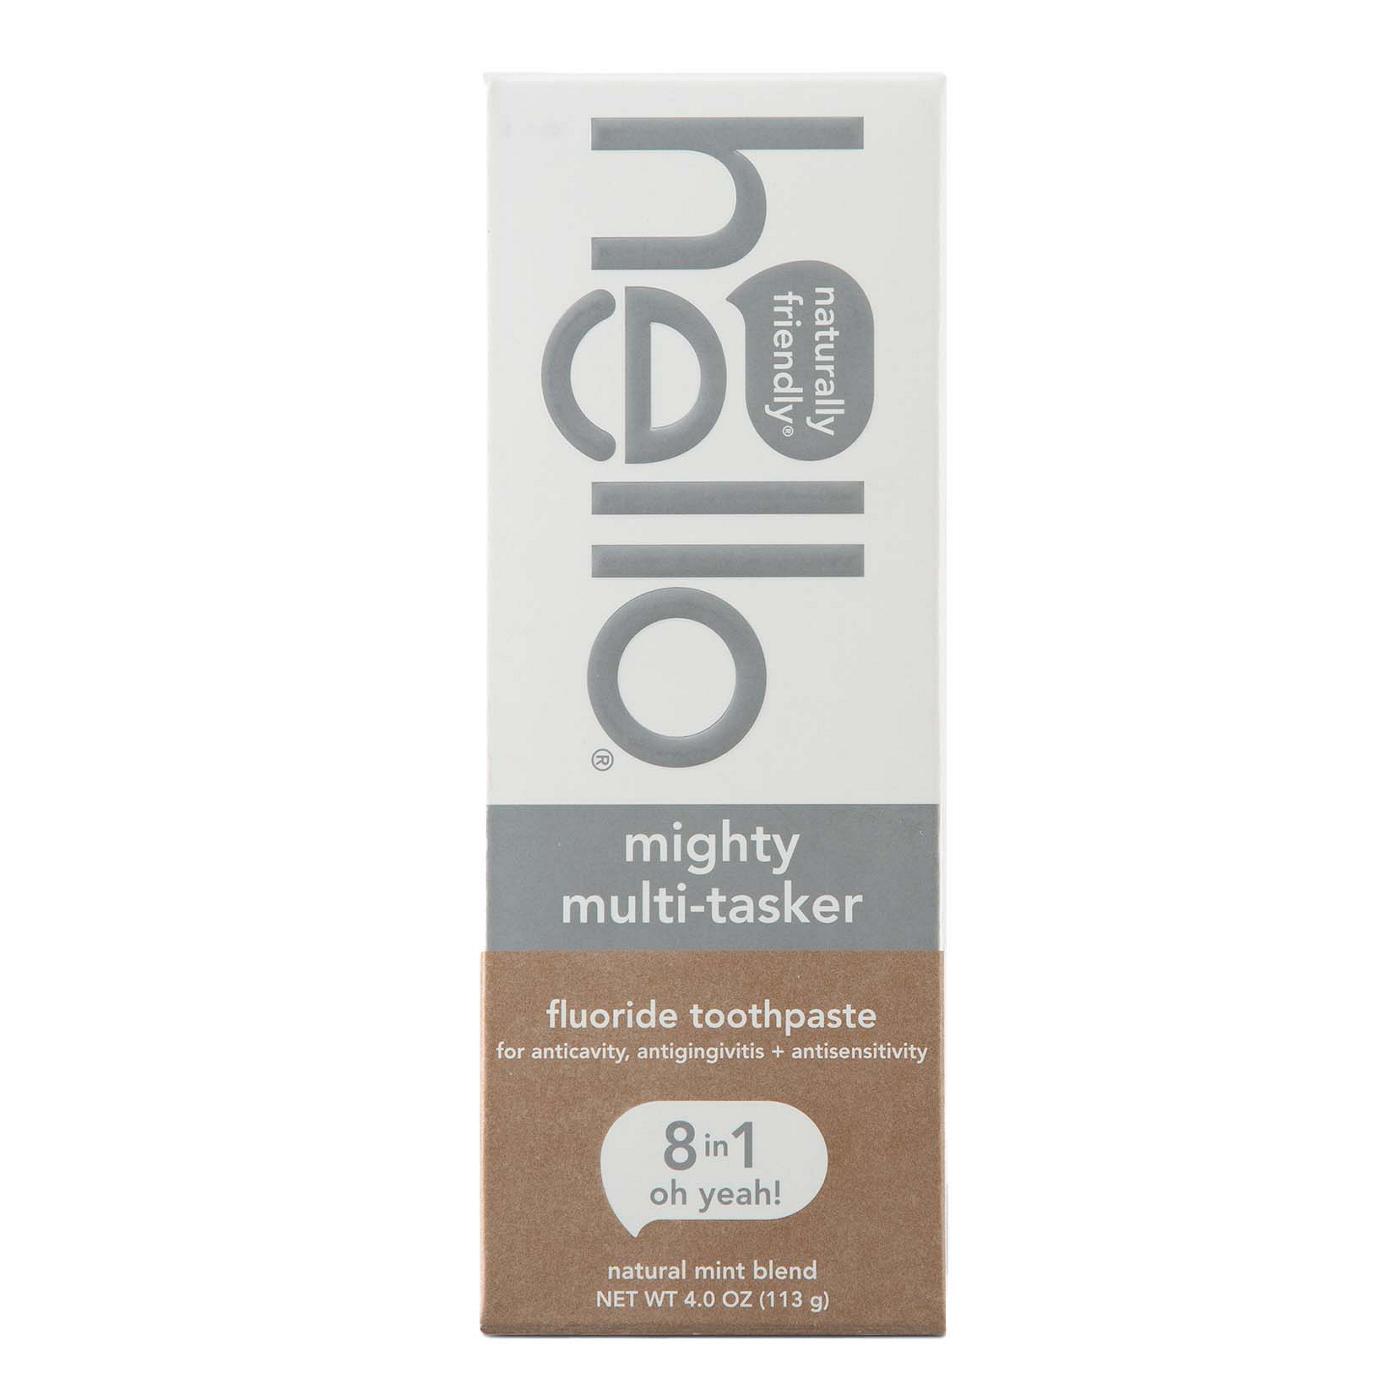 hello Mighty Multi-Tasker Fluoride Toothpaste - Natural Mint Blend; image 1 of 7